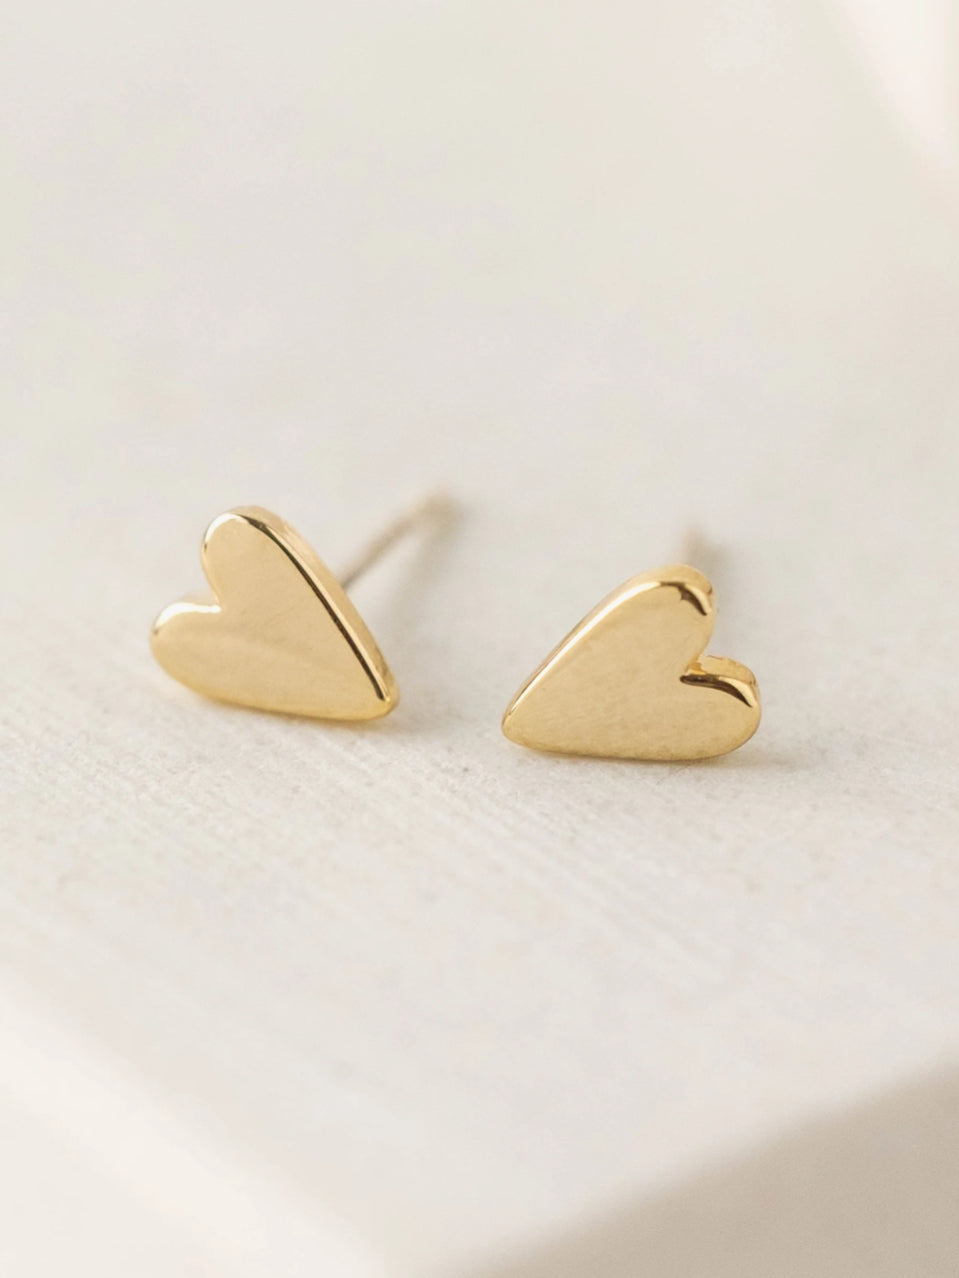 Lovers Tempo: Everly Heart Stud Earrings in Gold